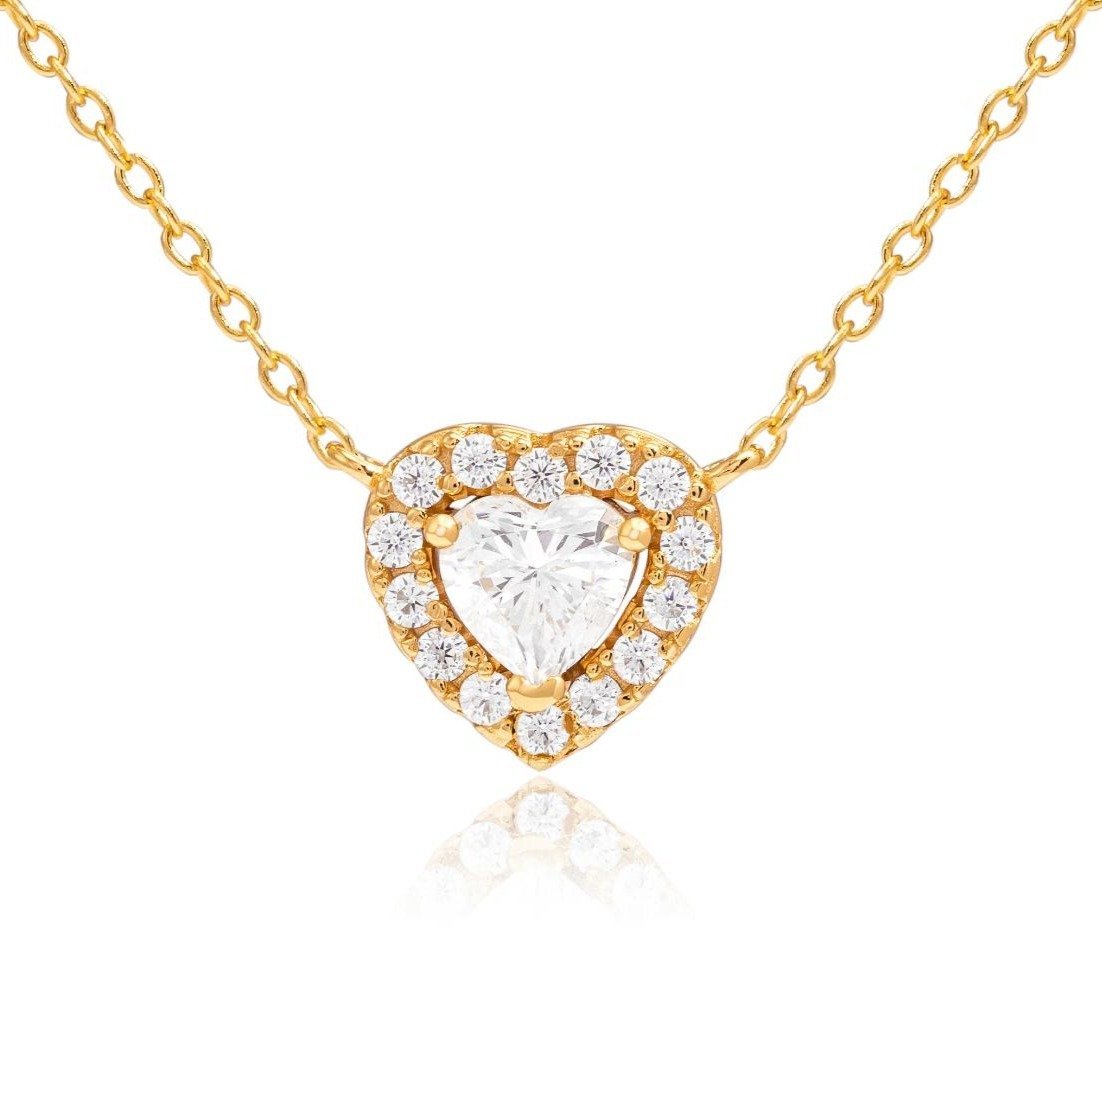 Heart necklace yellow gold